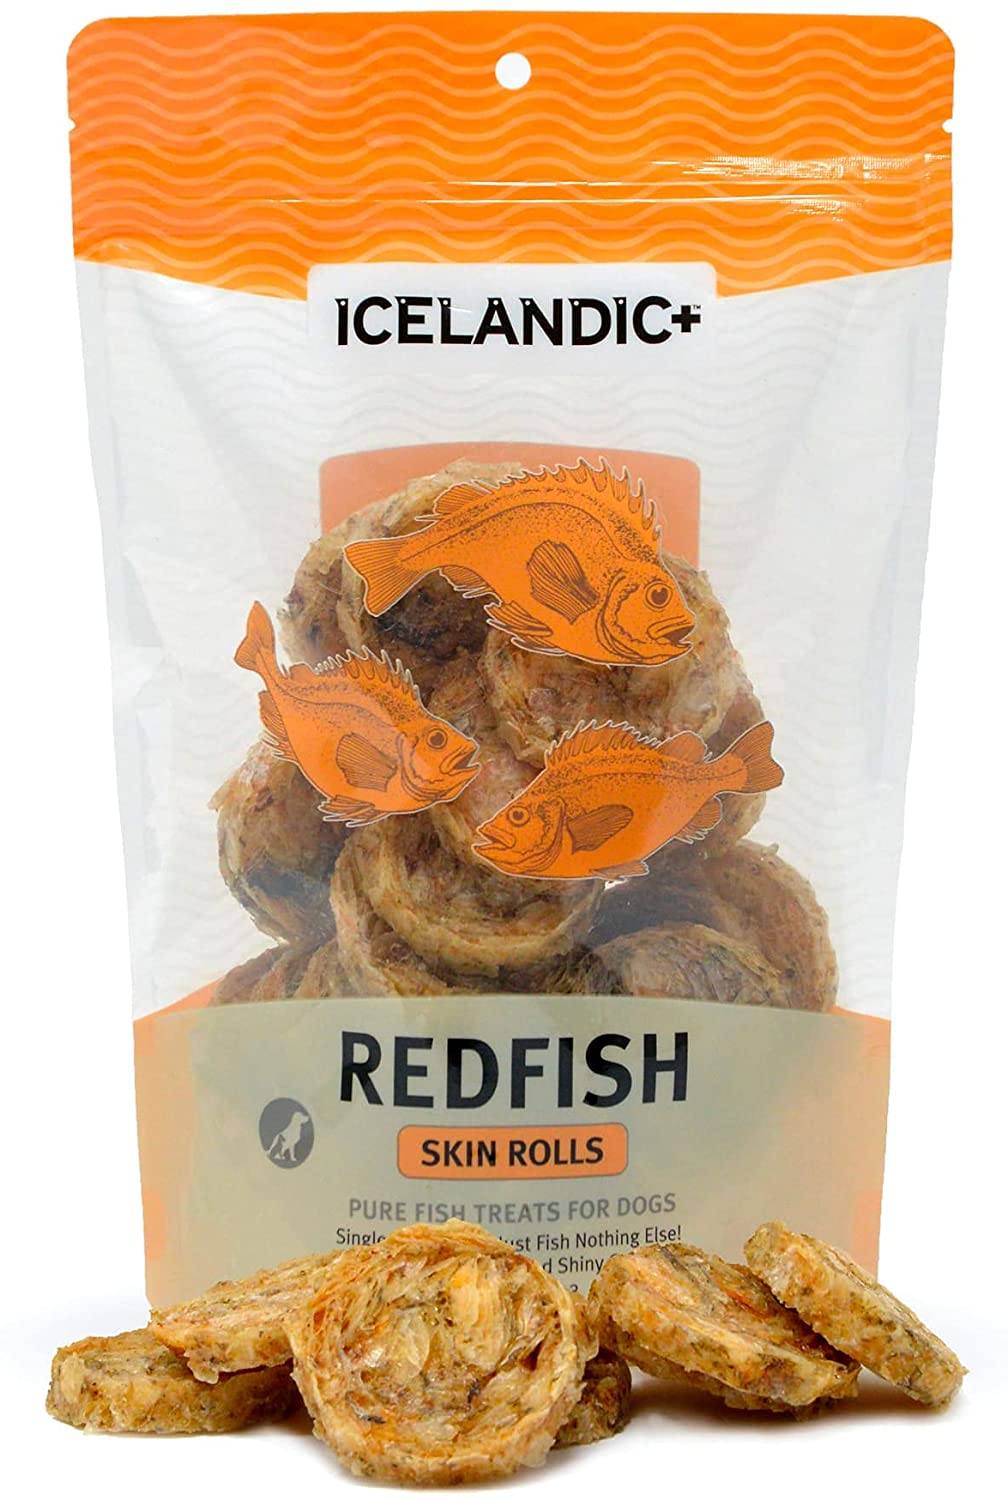 Icelandic+ Redfish Skin Rolls Natural Dehydrated Cat and Dog Treats - 3 oz  